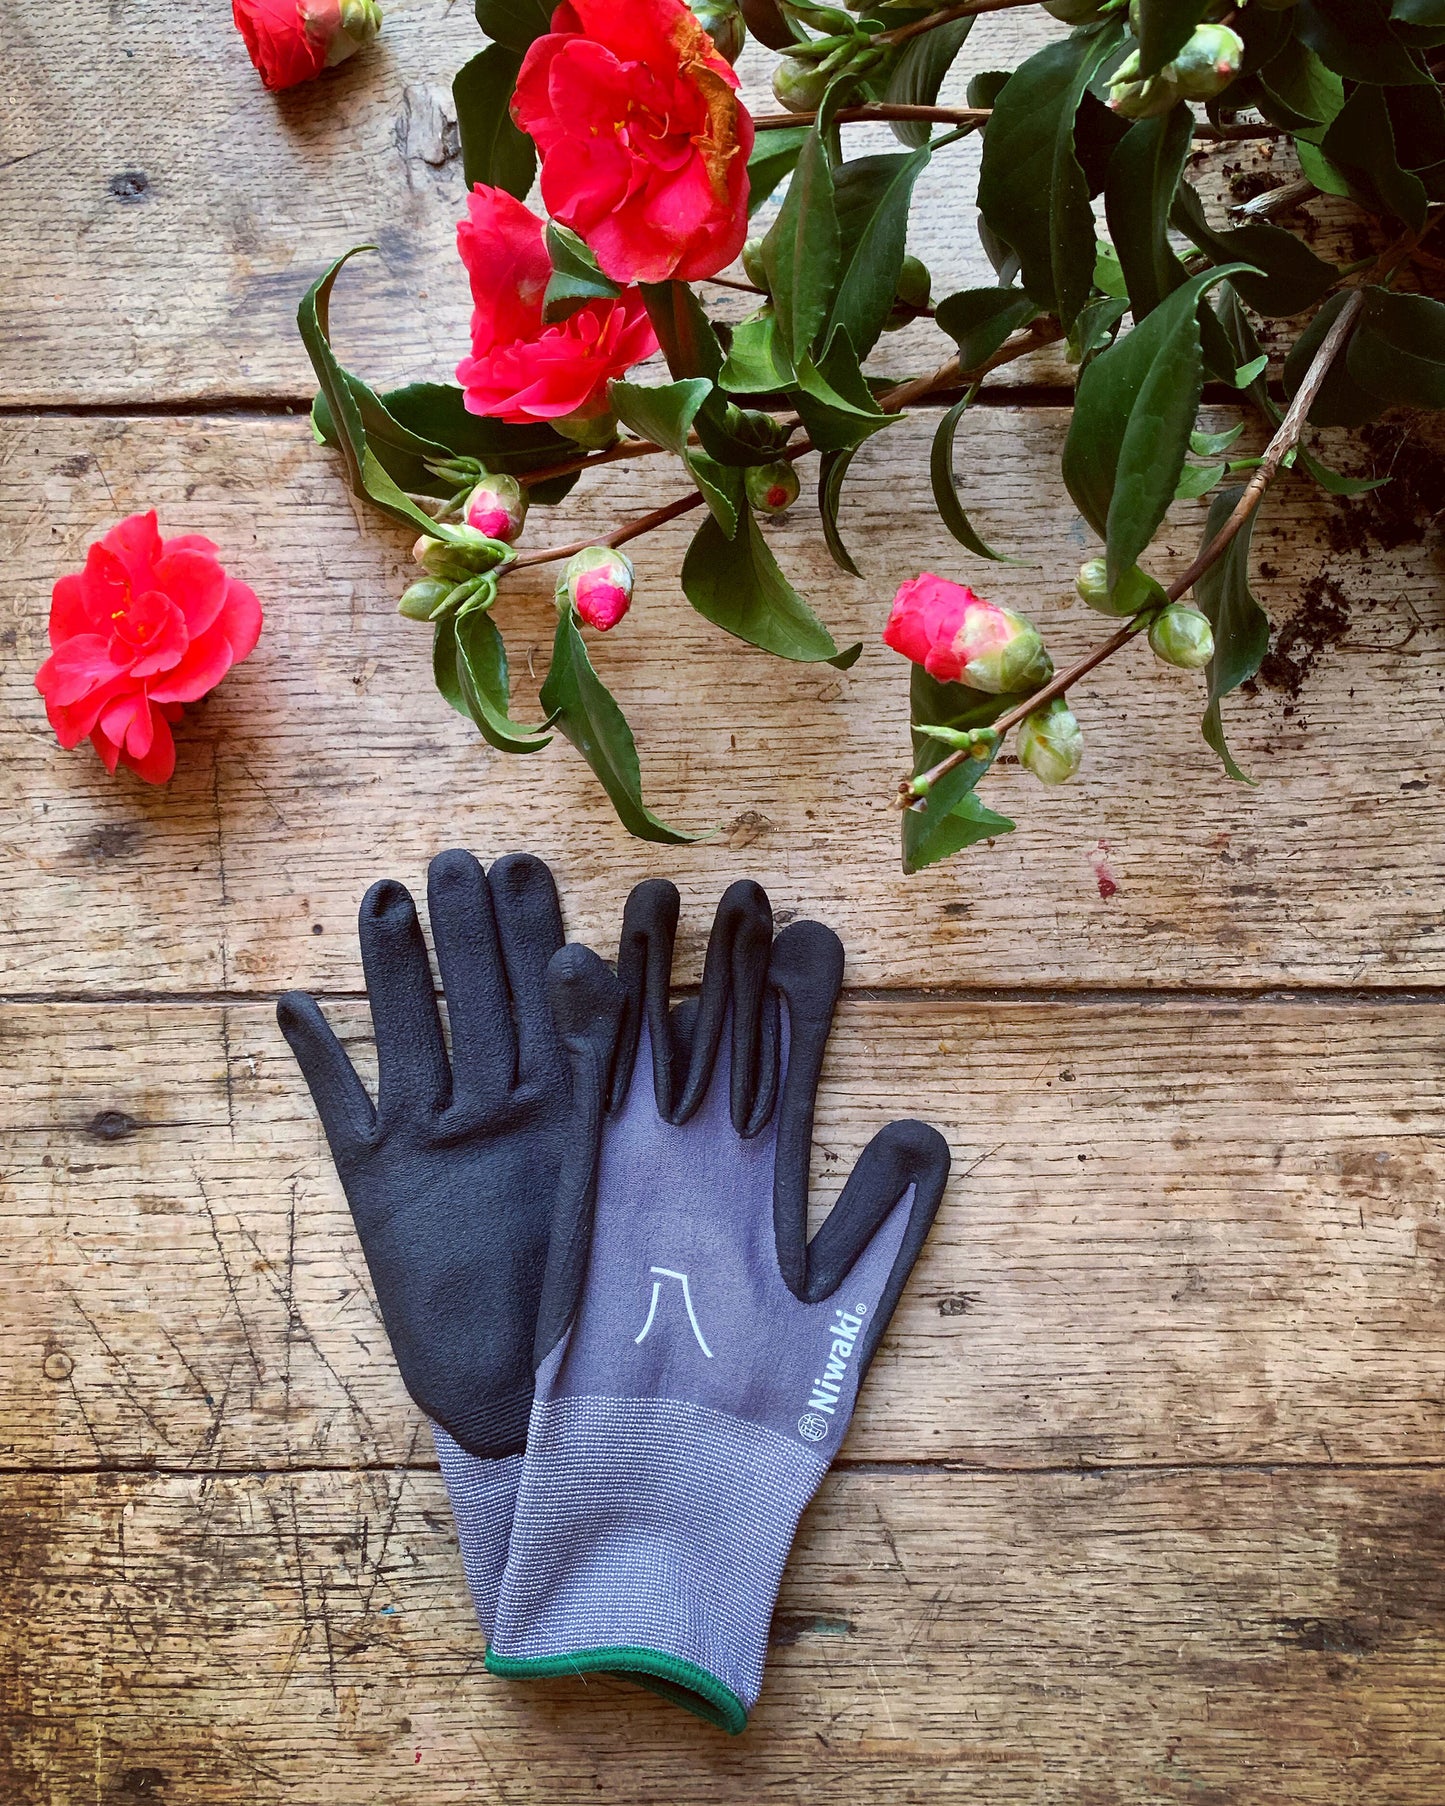 Flexible, easy-use garden gloves with breathable nylon-spandex liner and nitrile coating by Japanese-inspired Gardening experts Niwaki.